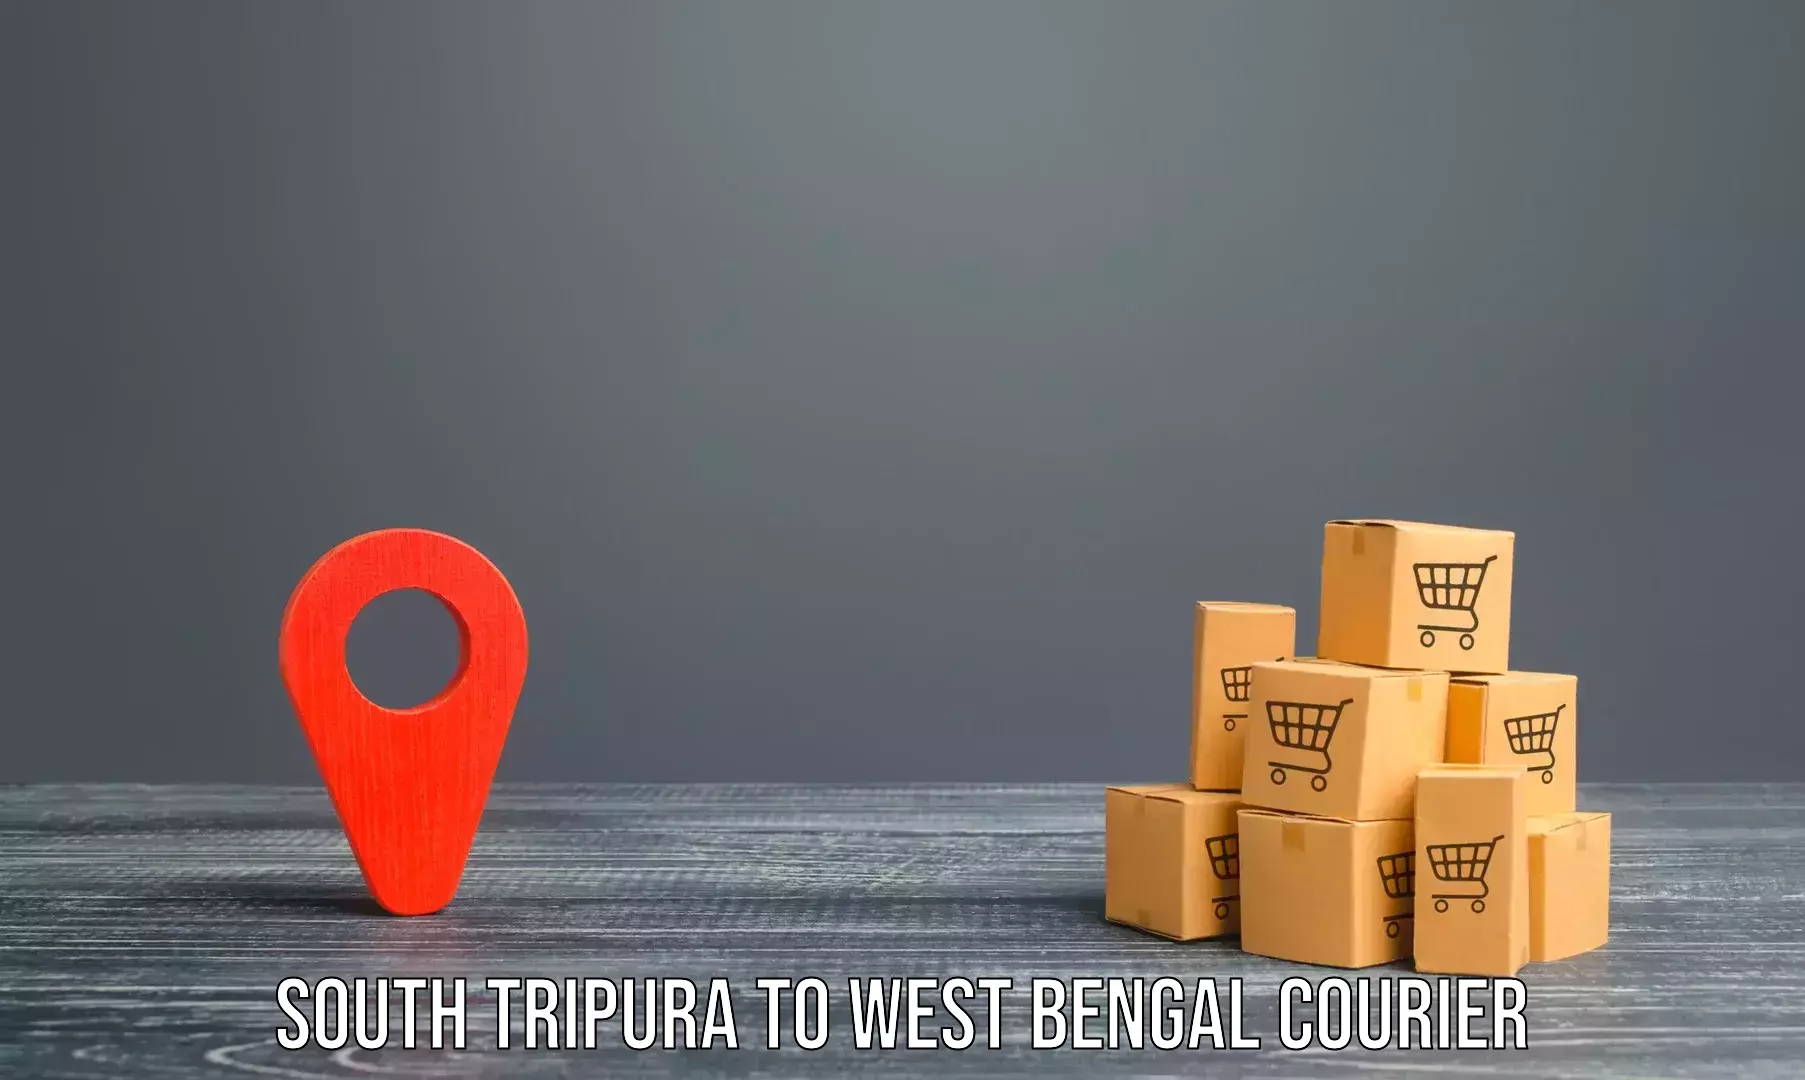 Furniture transport specialists South Tripura to Barrackpore